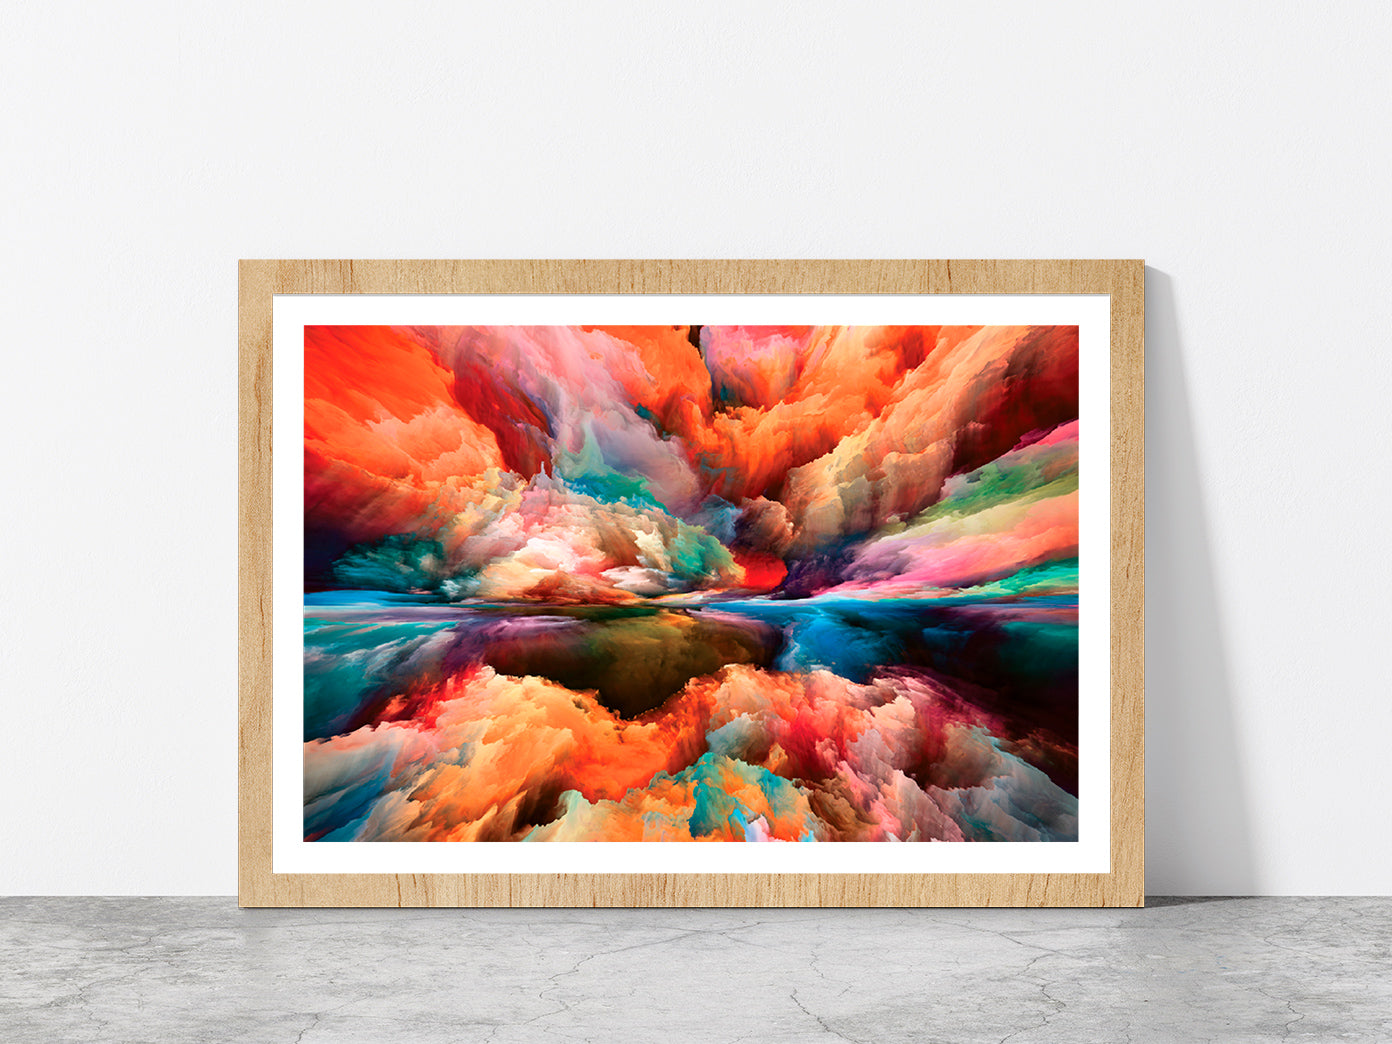 Colorful Abstract Cloud Paint Glass Framed Wall Art, Ready to Hang Quality Print With White Border Oak